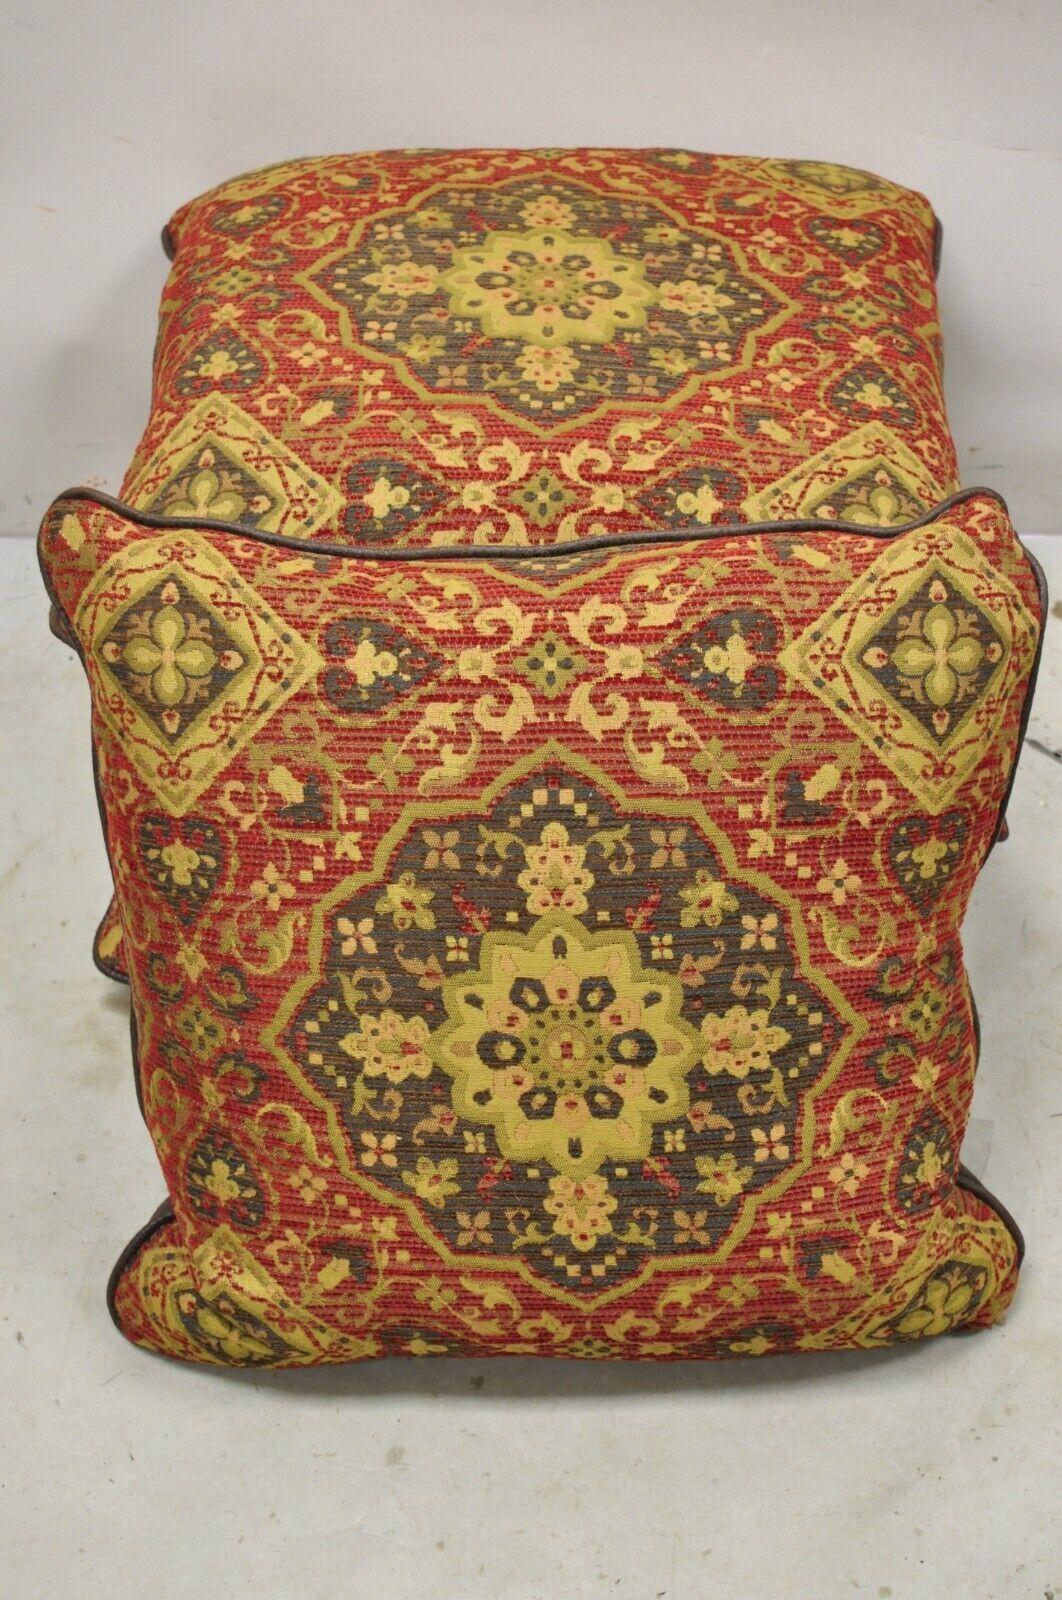 Contemporary Mediterranean Style Red and Brown Tapestry Reversible Faux Leather Pillows - Set of 4. Circa 21st Century, Pre-owned
Measurements: 8